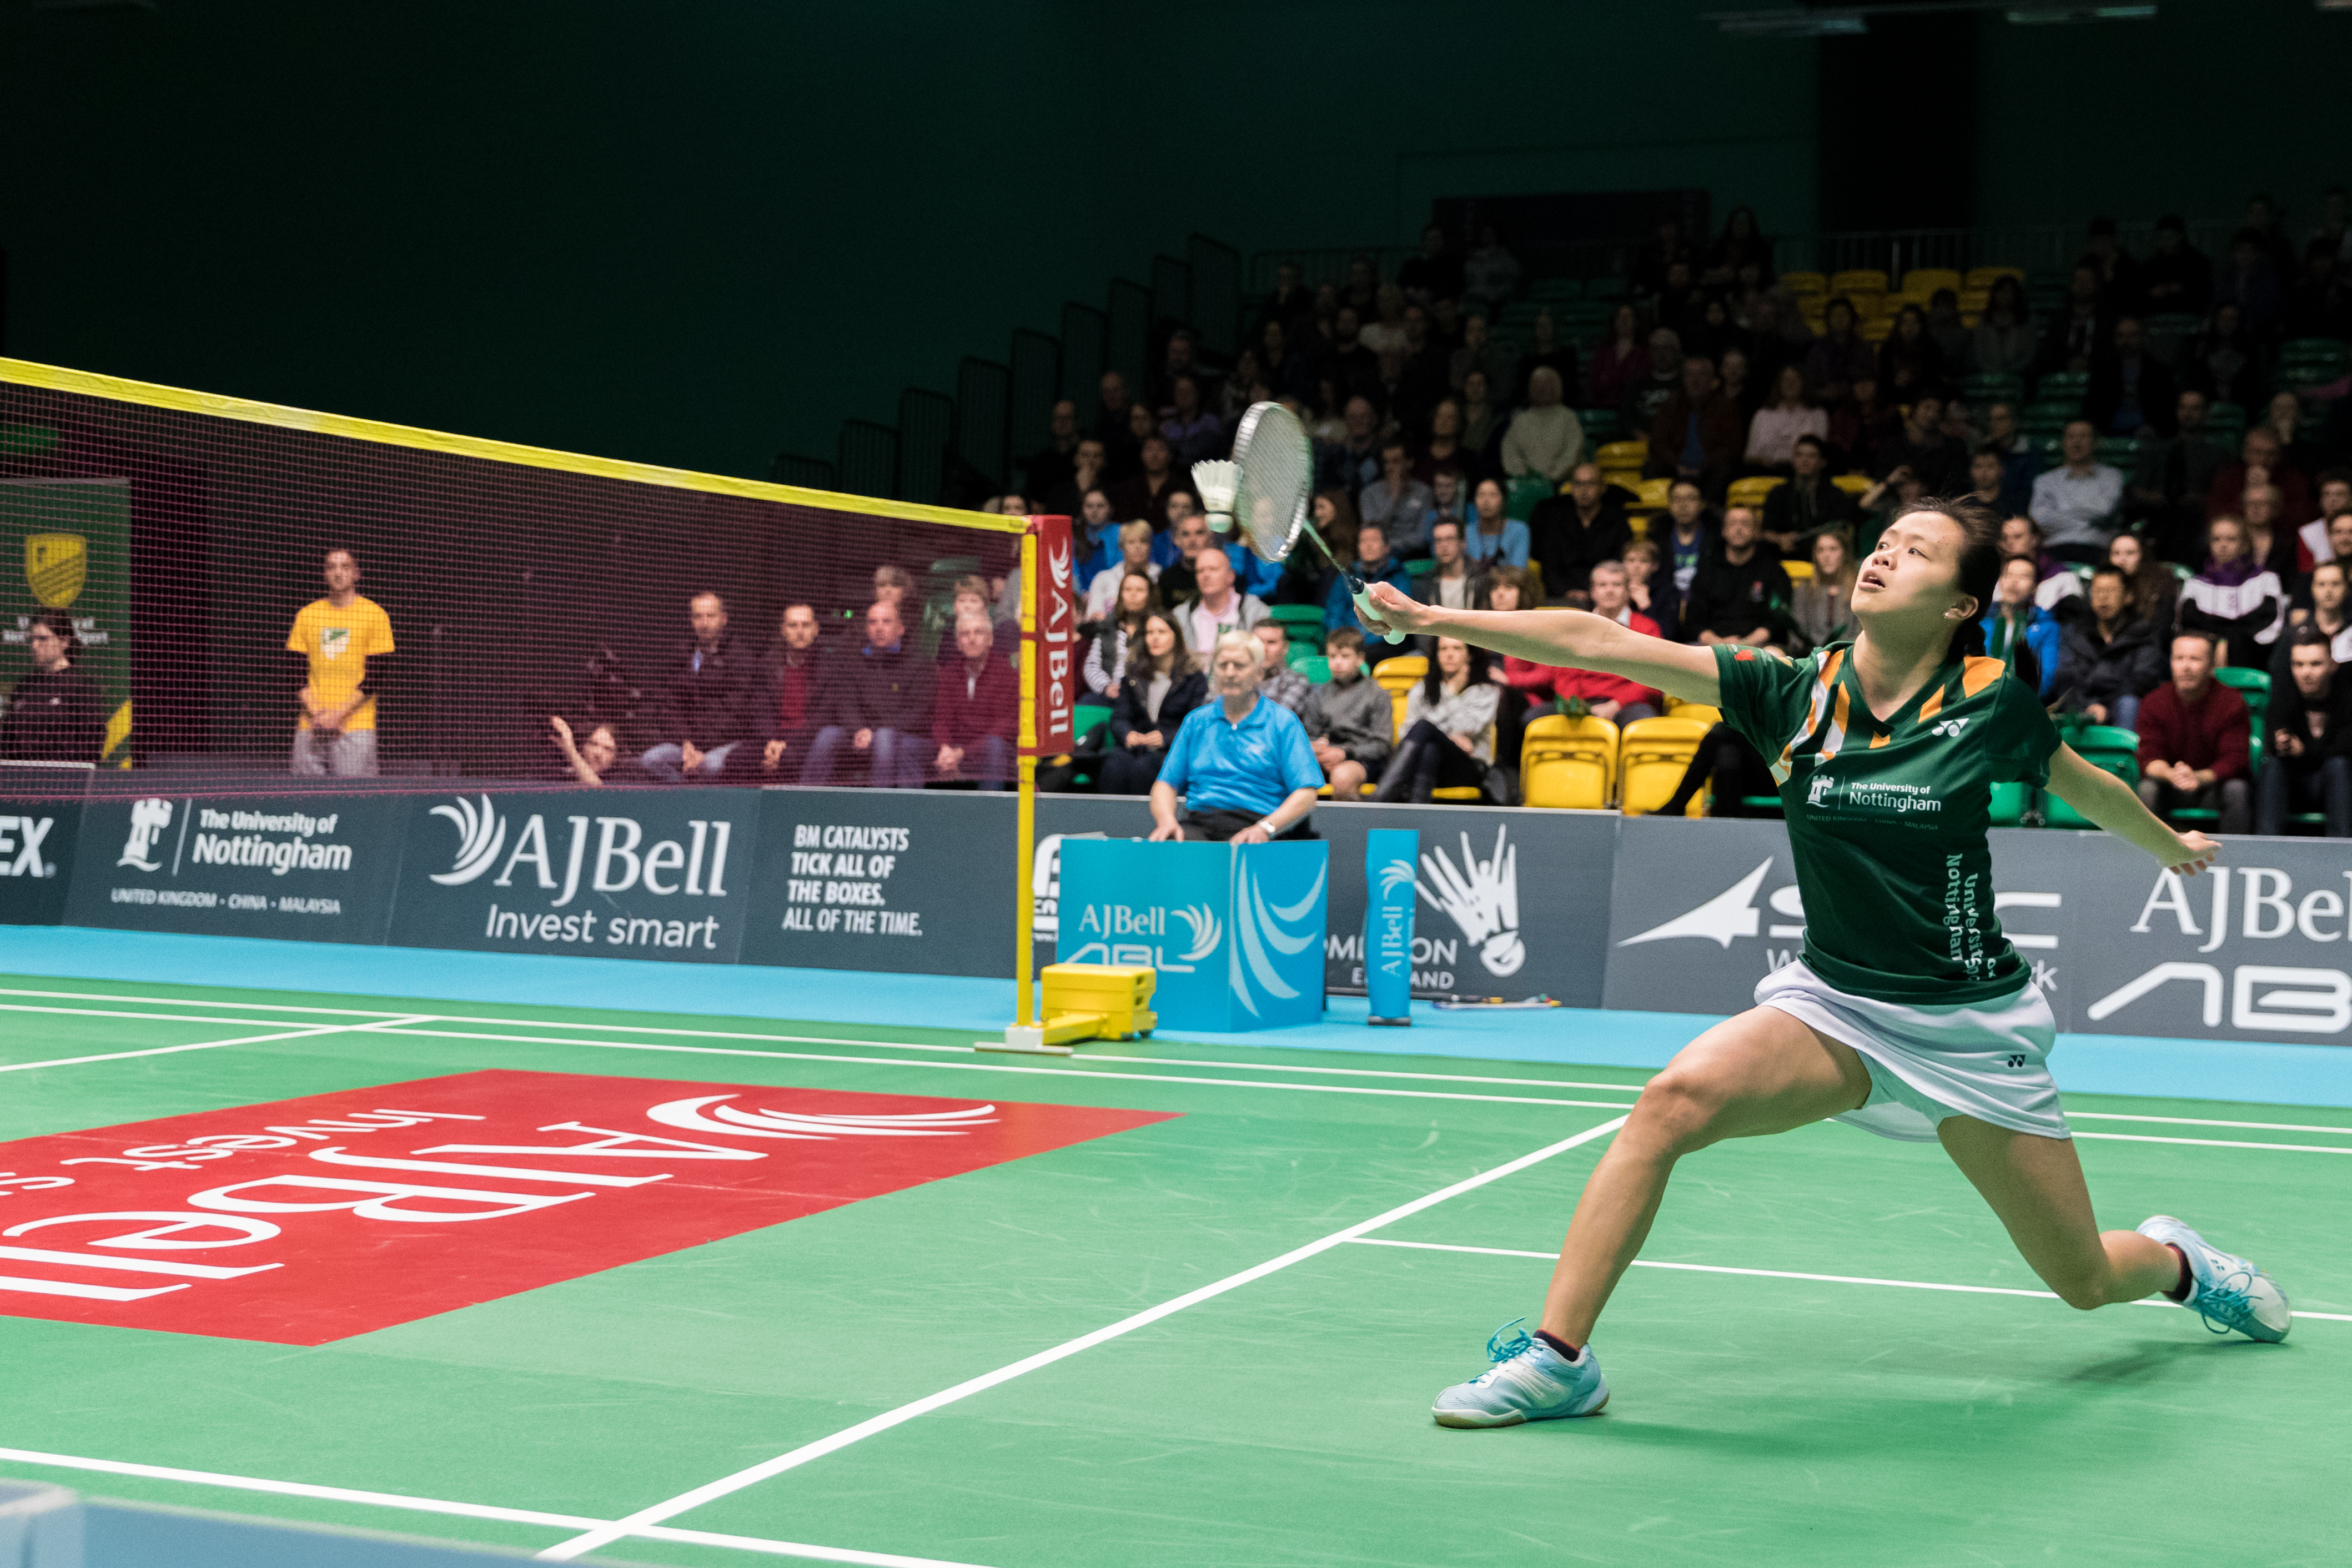 NBL National Badminton League The University Of Nottingham Vs Louvhborough. Photos By Alex Wilkinson Photography And Videography Www.alexwilkinsonphotography.co .uk 150 Of 368 